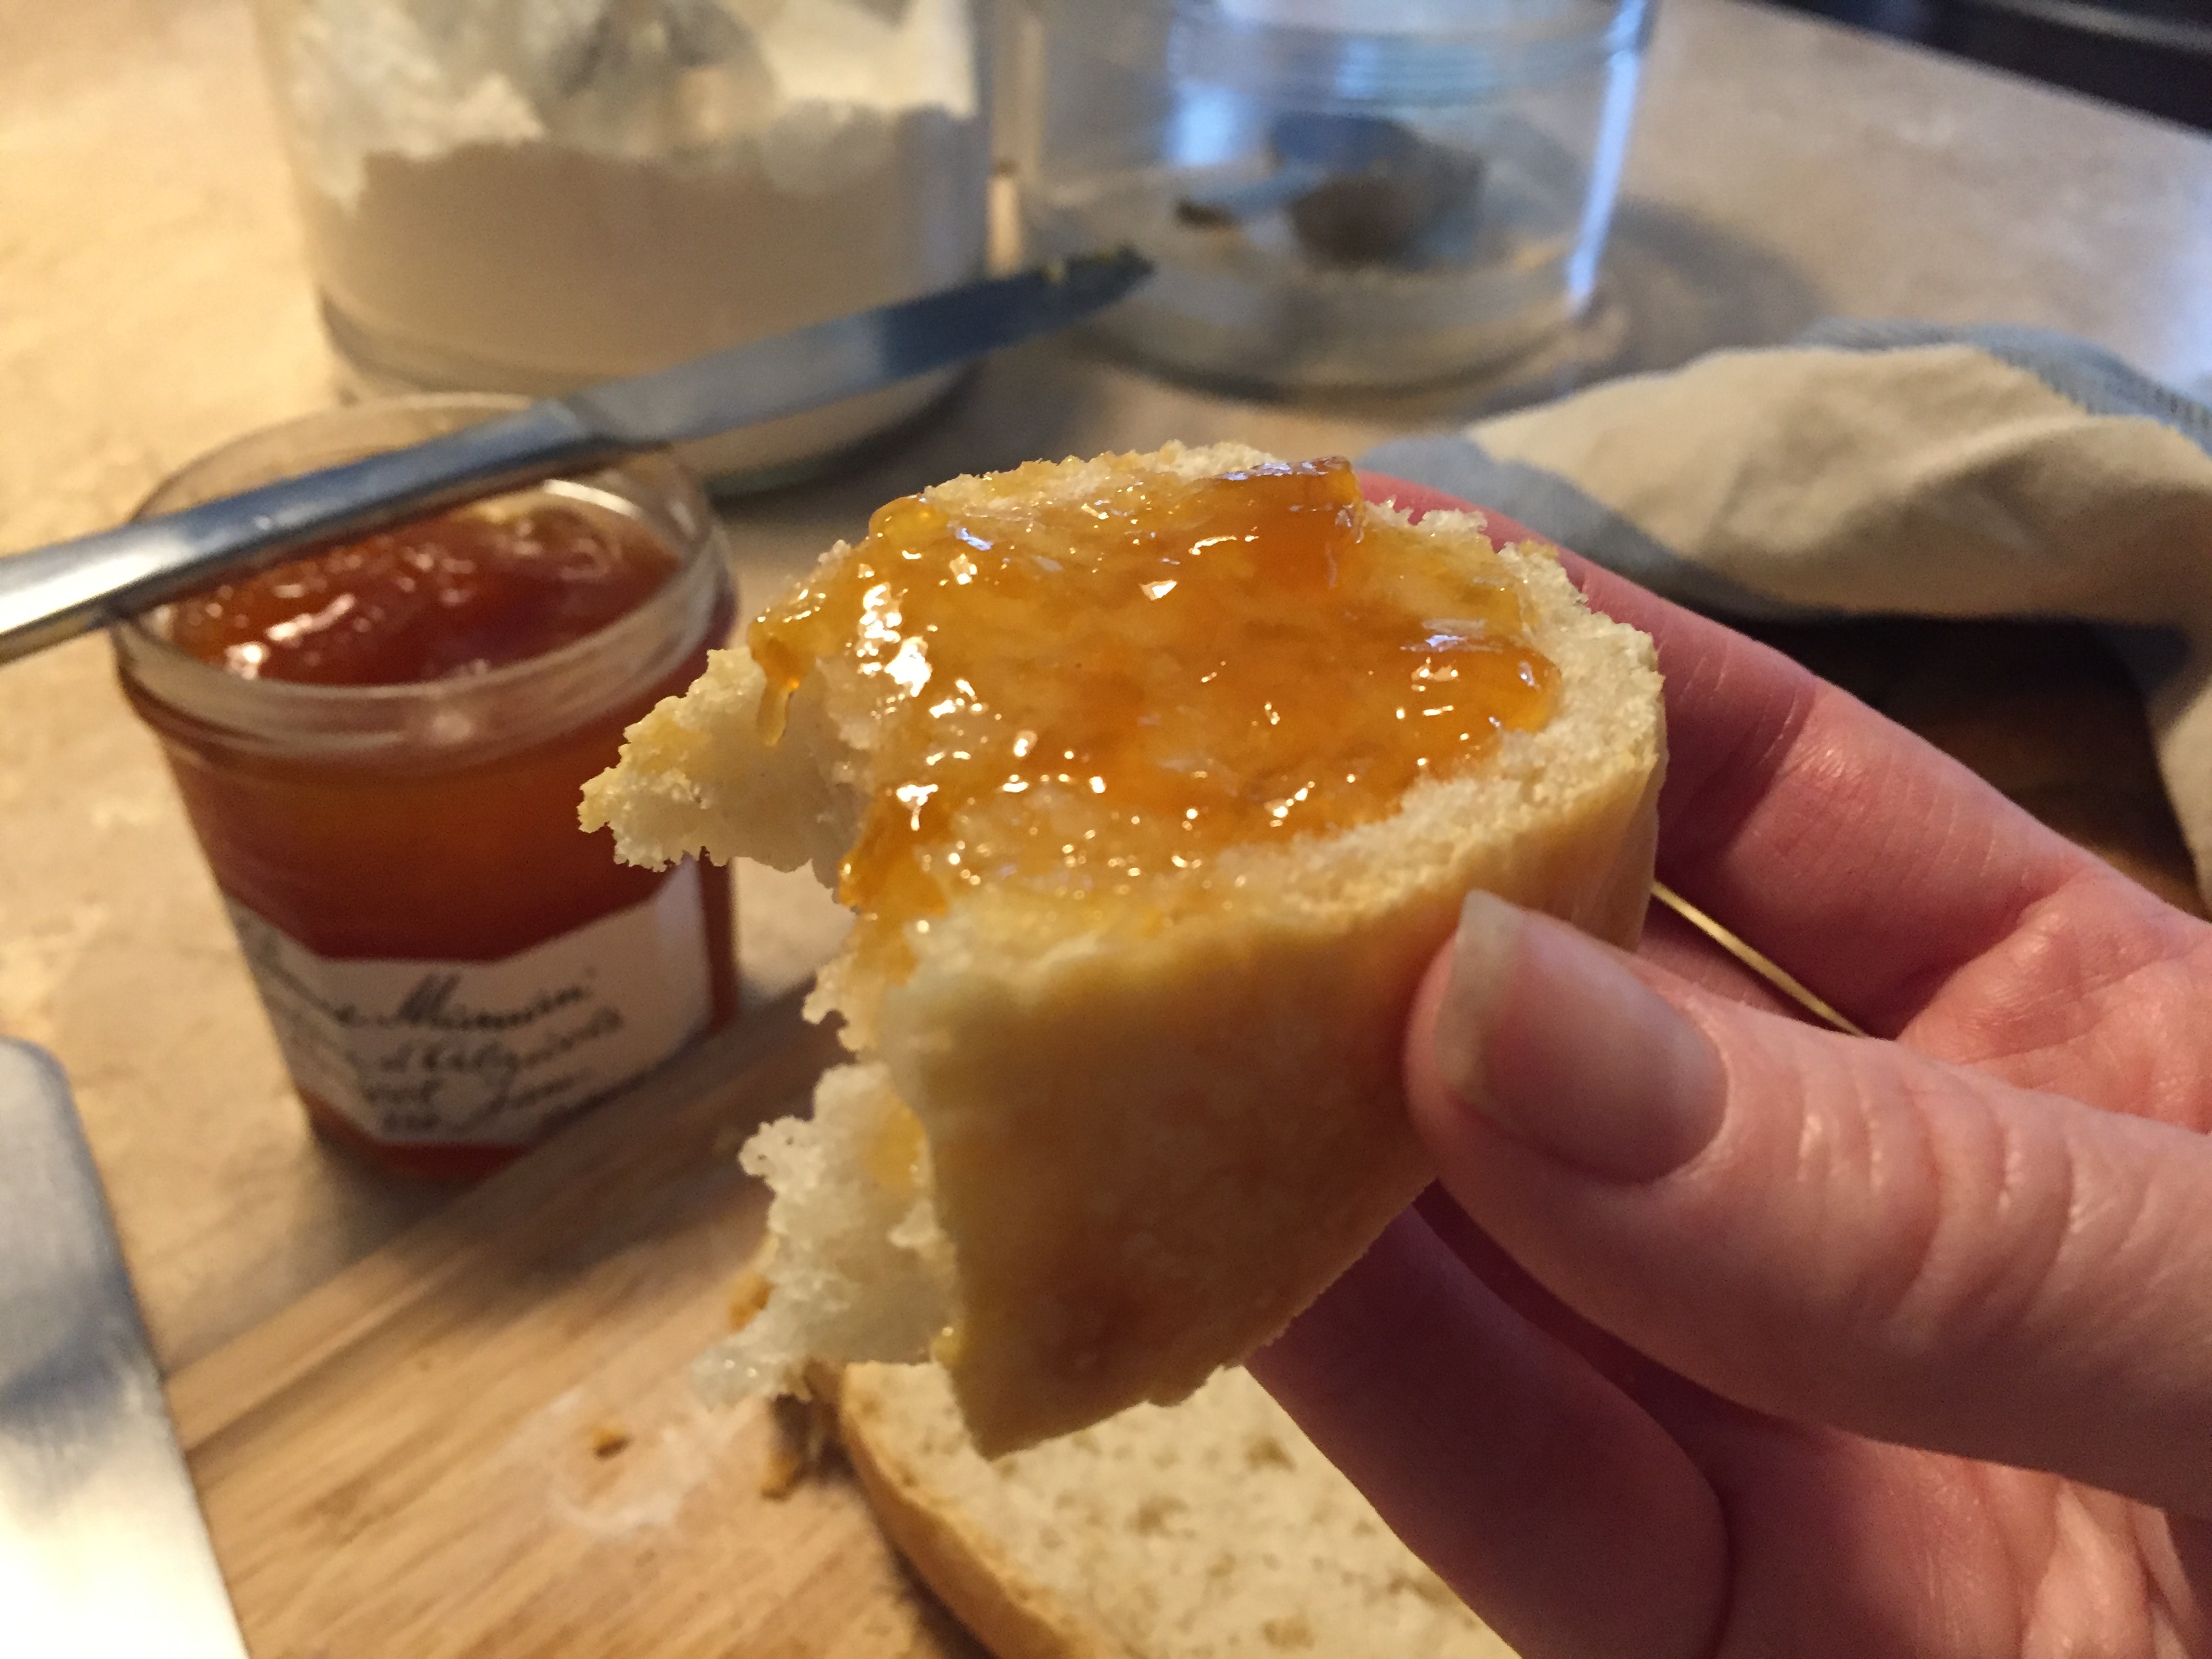 A slice of sourdough slathered with apricot jam